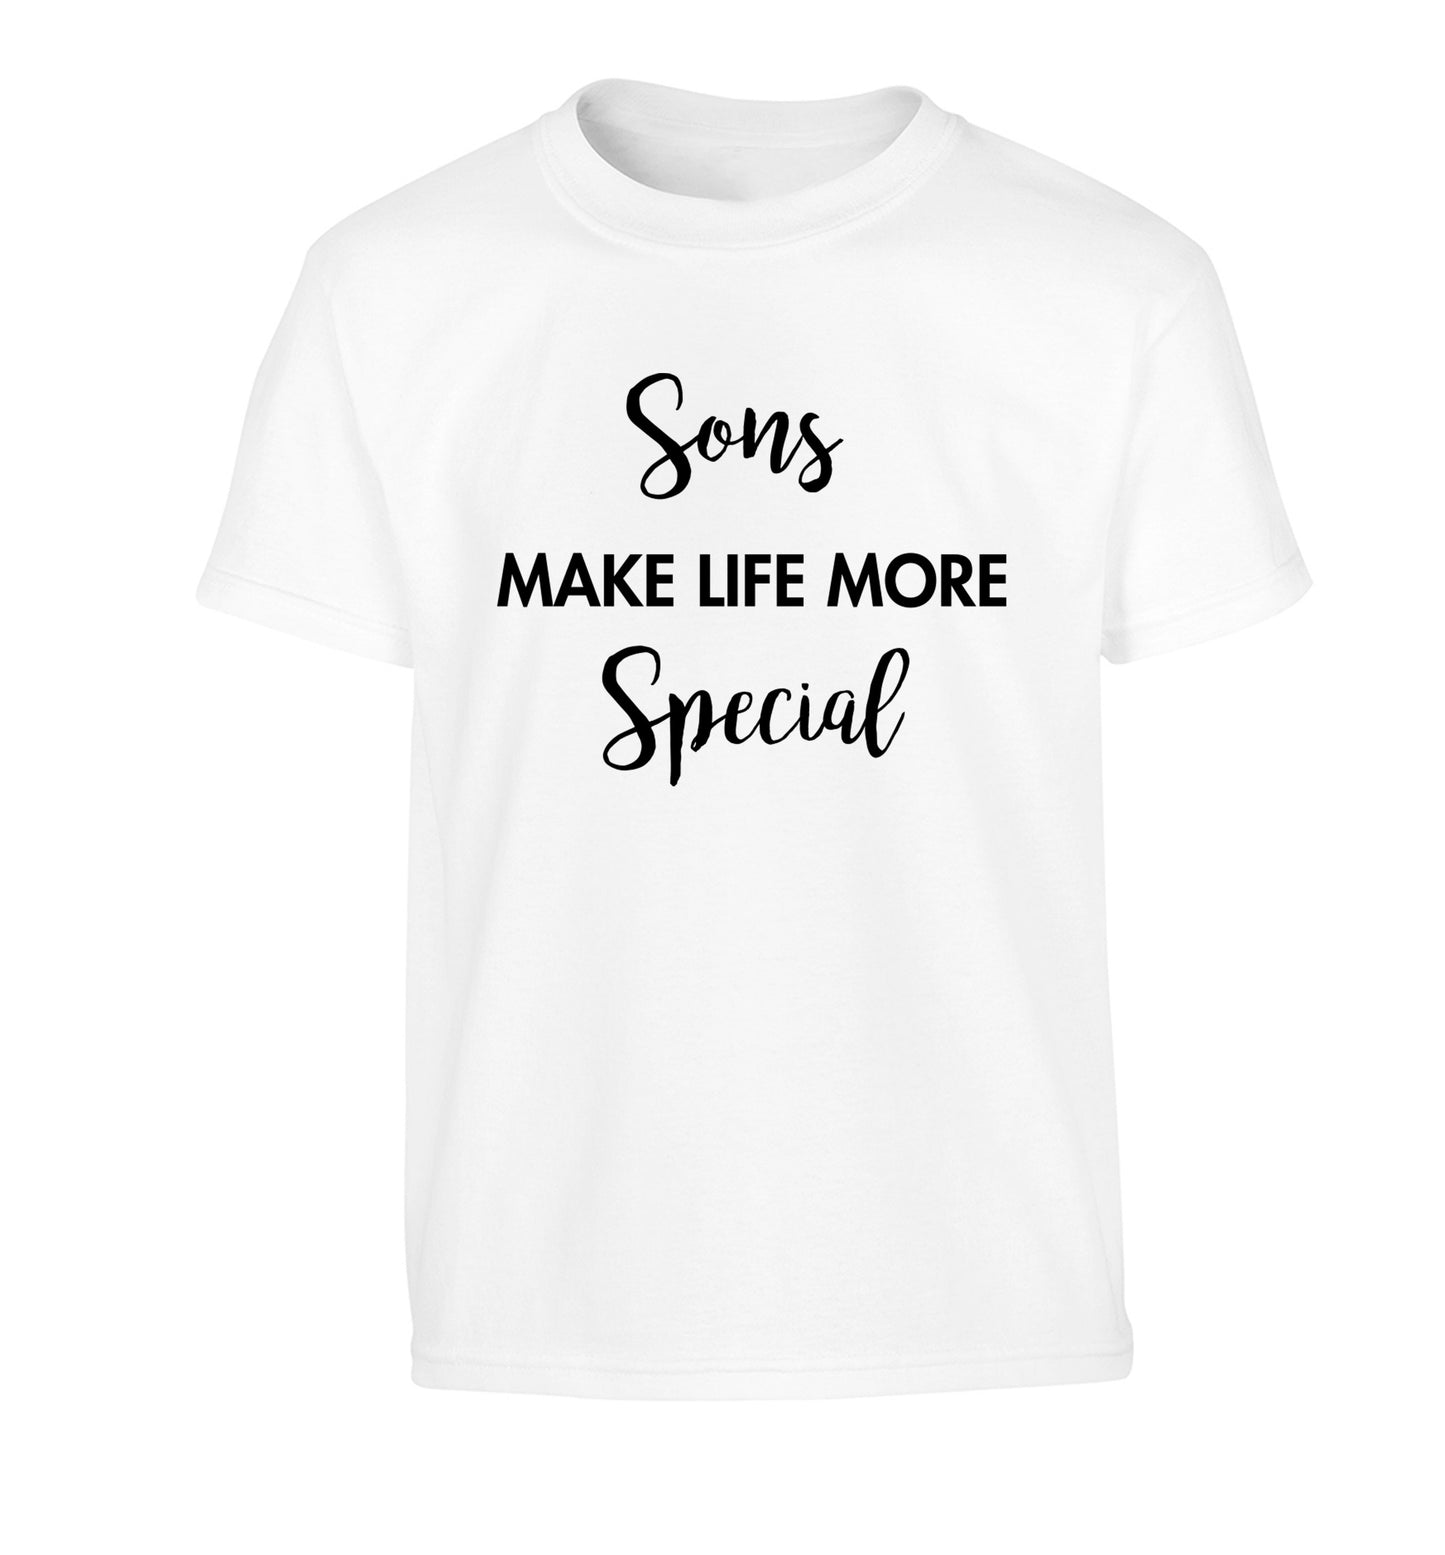 Daughters make life more special Children's white Tshirt 12-14 Years